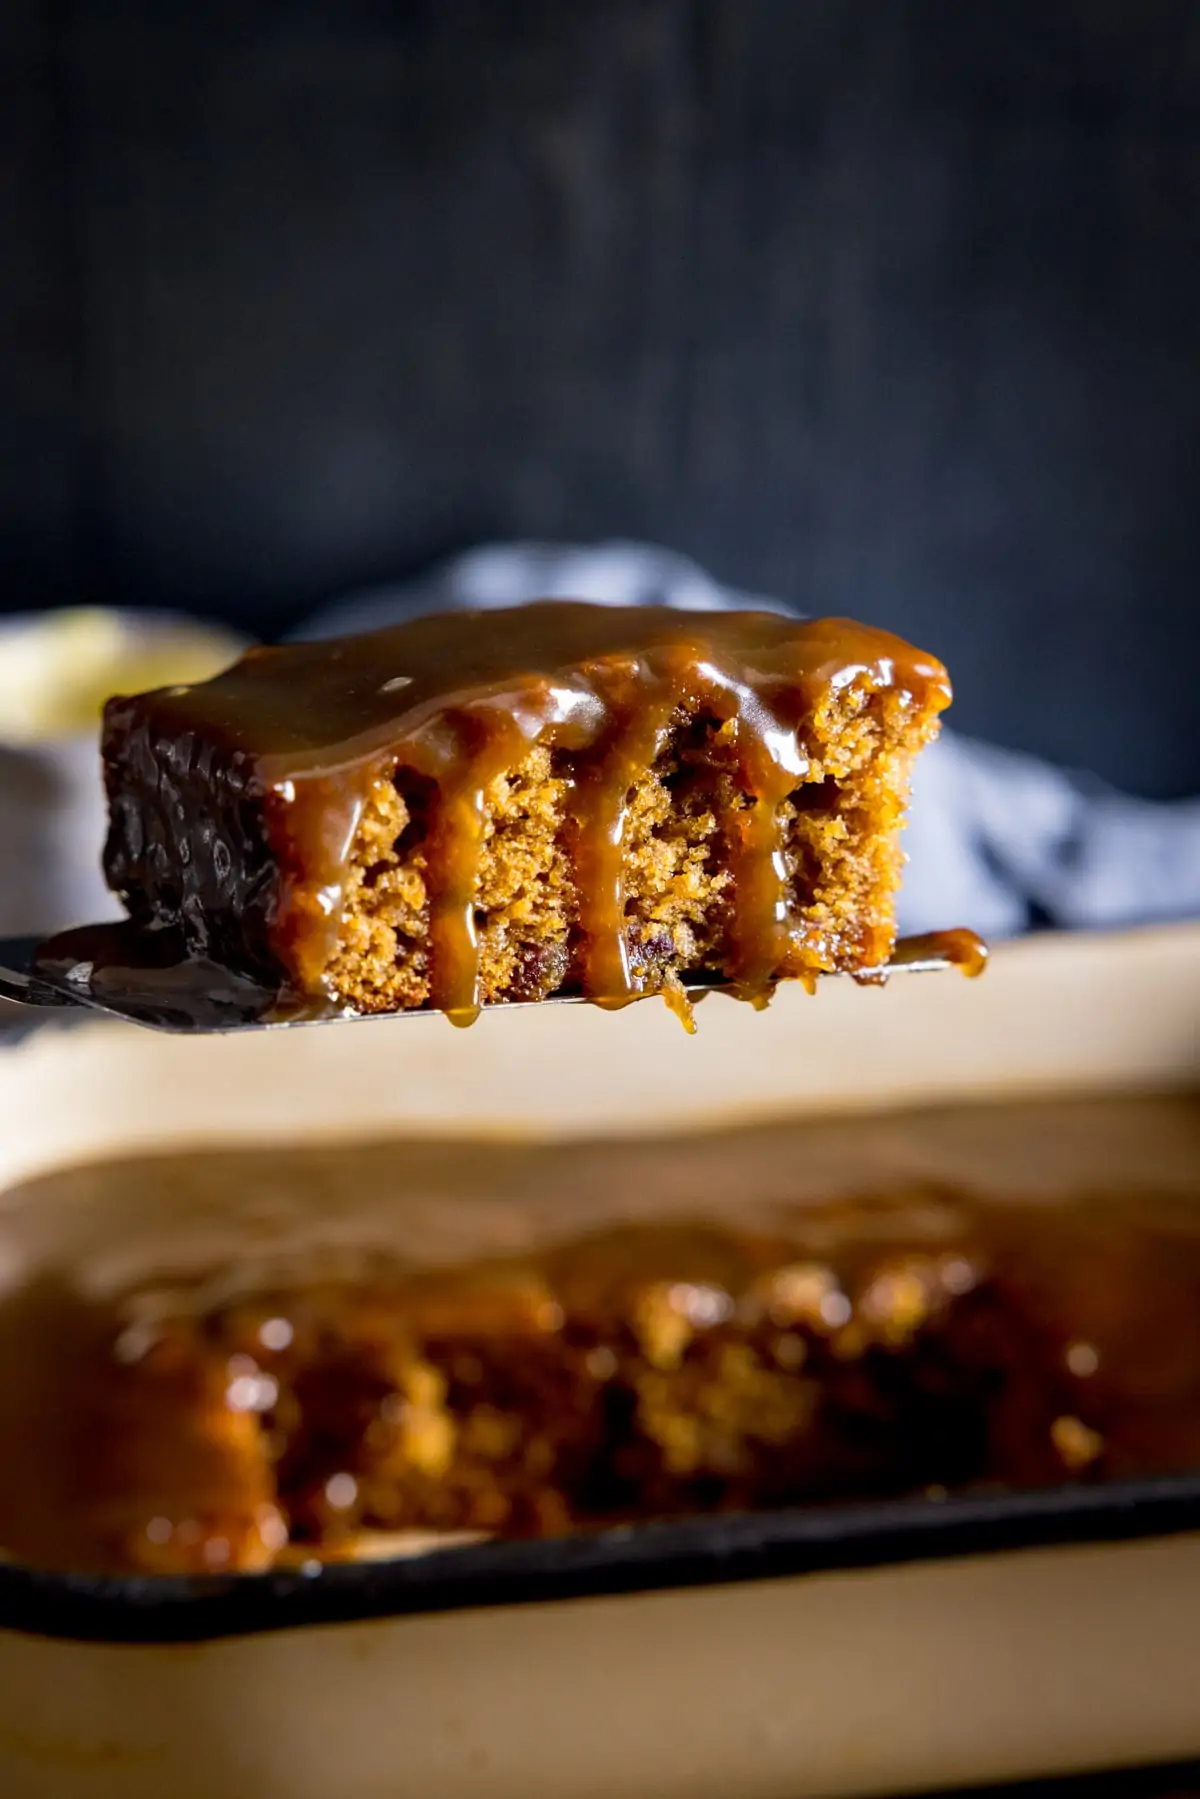 Tall image of a piece of sticky toffee pudding being lifted from a baking tray